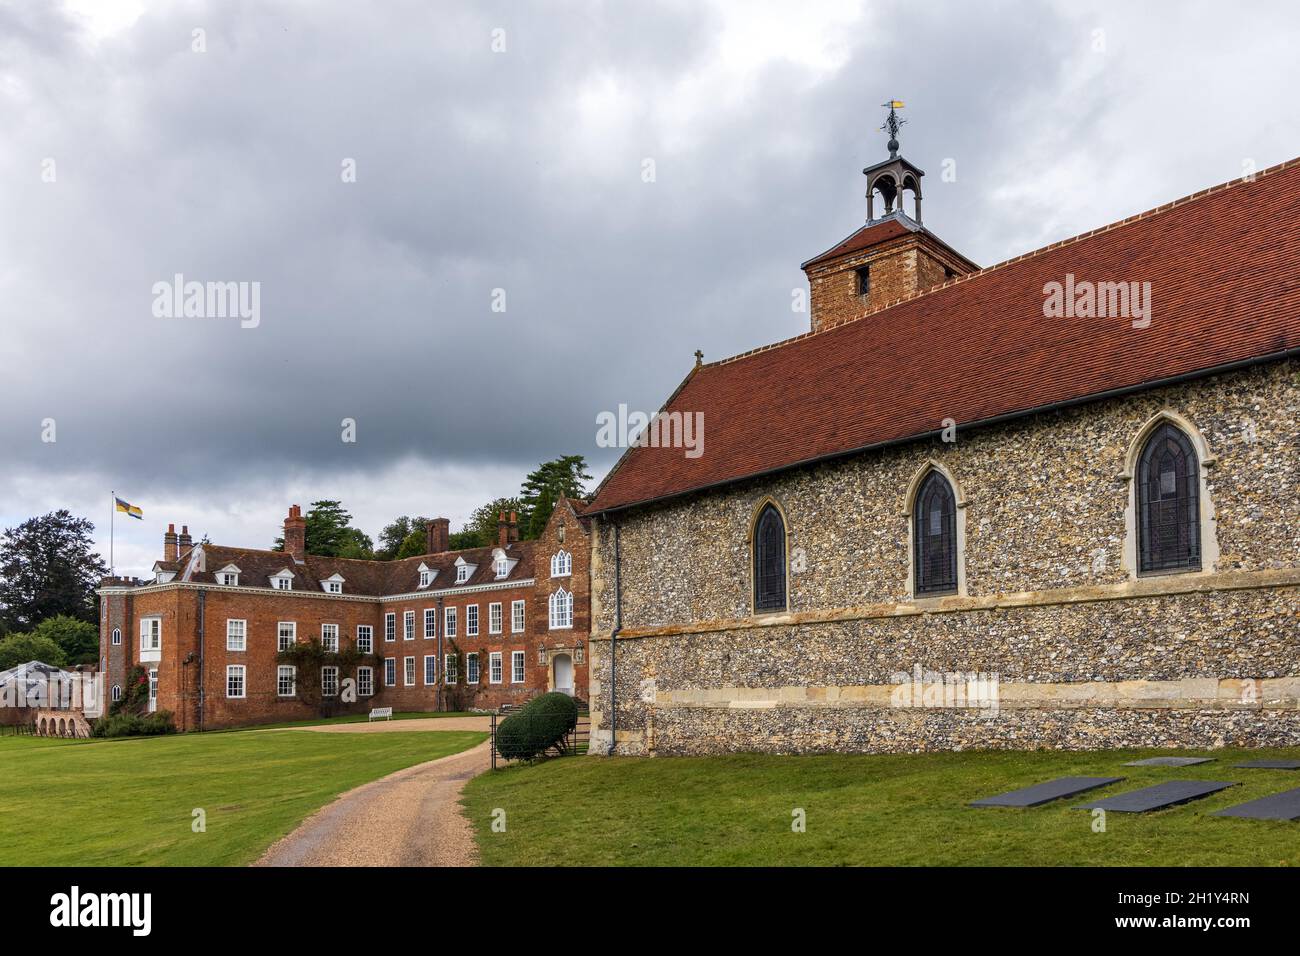 Stonor House and its 12th-century private chapel at Stonor Park, situated in a valley in the Chiltern Hills near Henley-on-Thames, England. Stock Photo